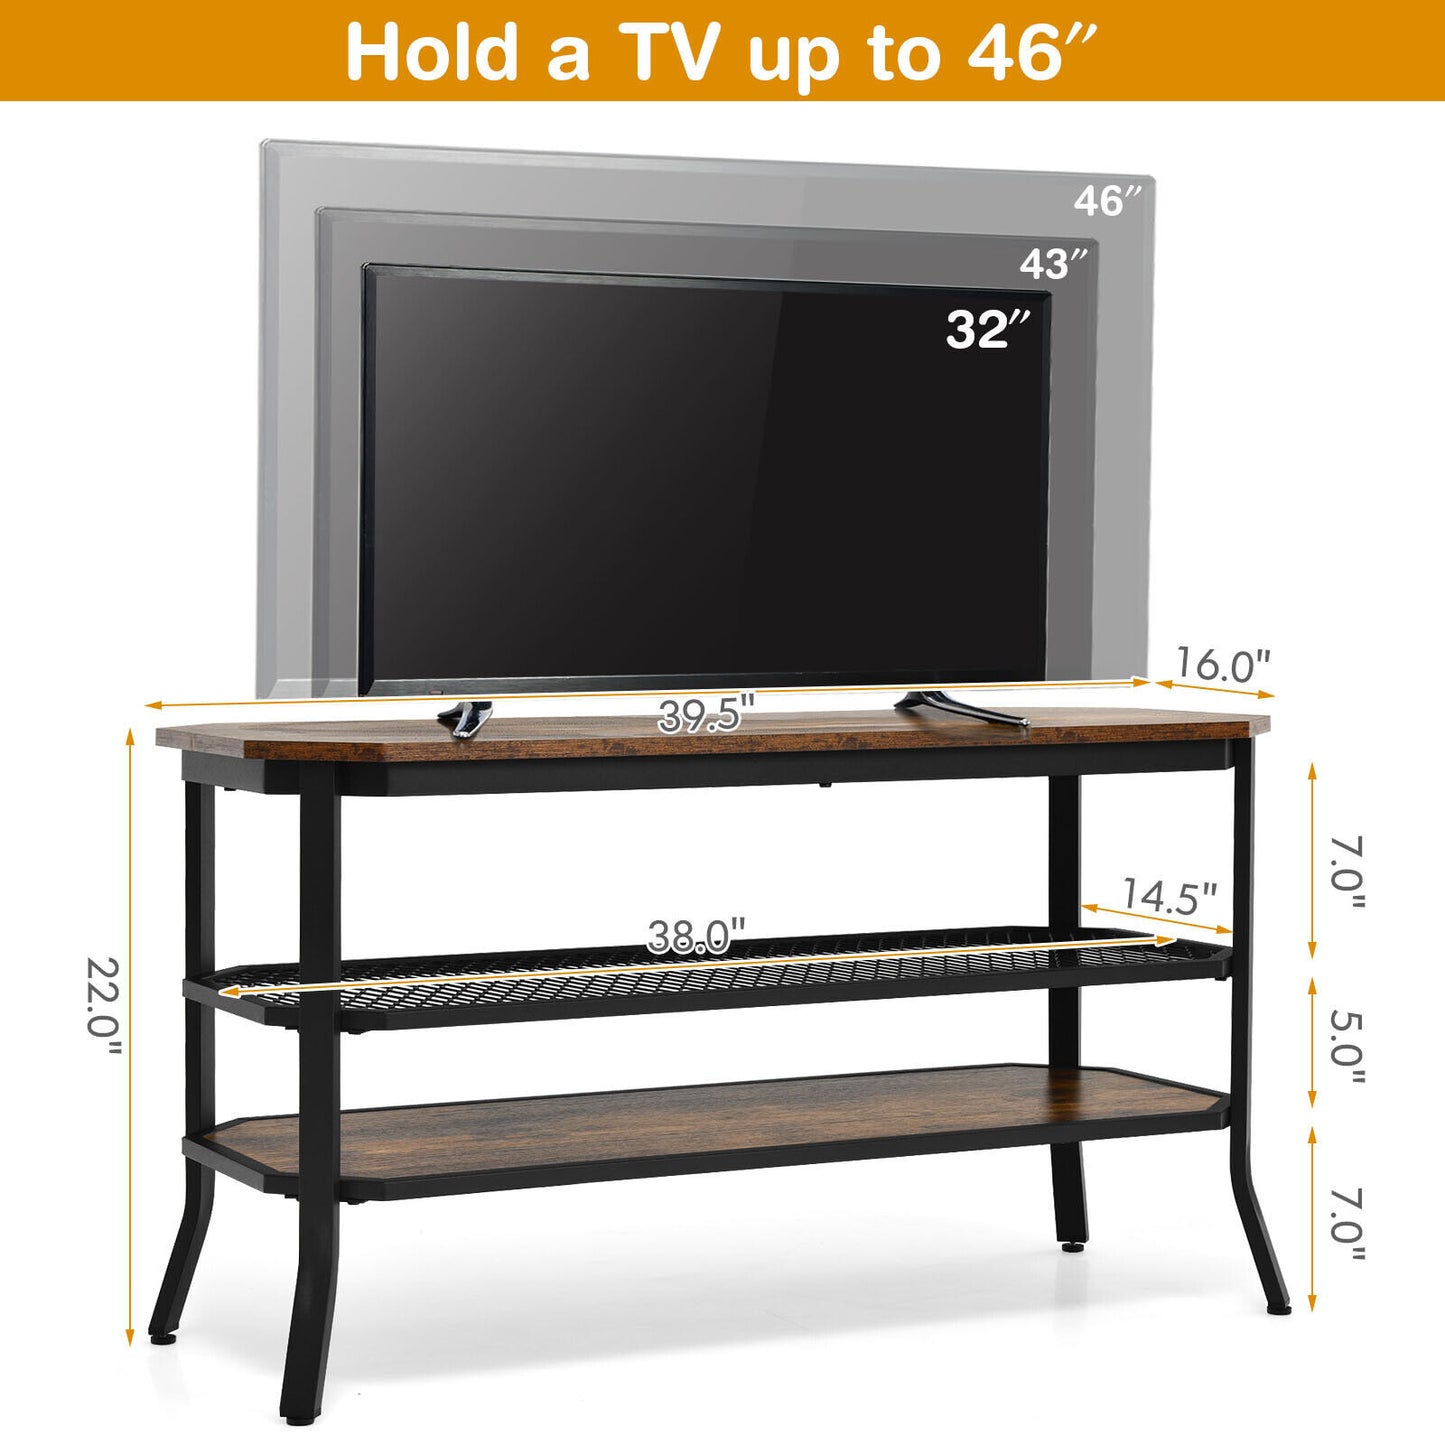 3 Tier TV Stand - Media Console with Mesh Storage Shelf